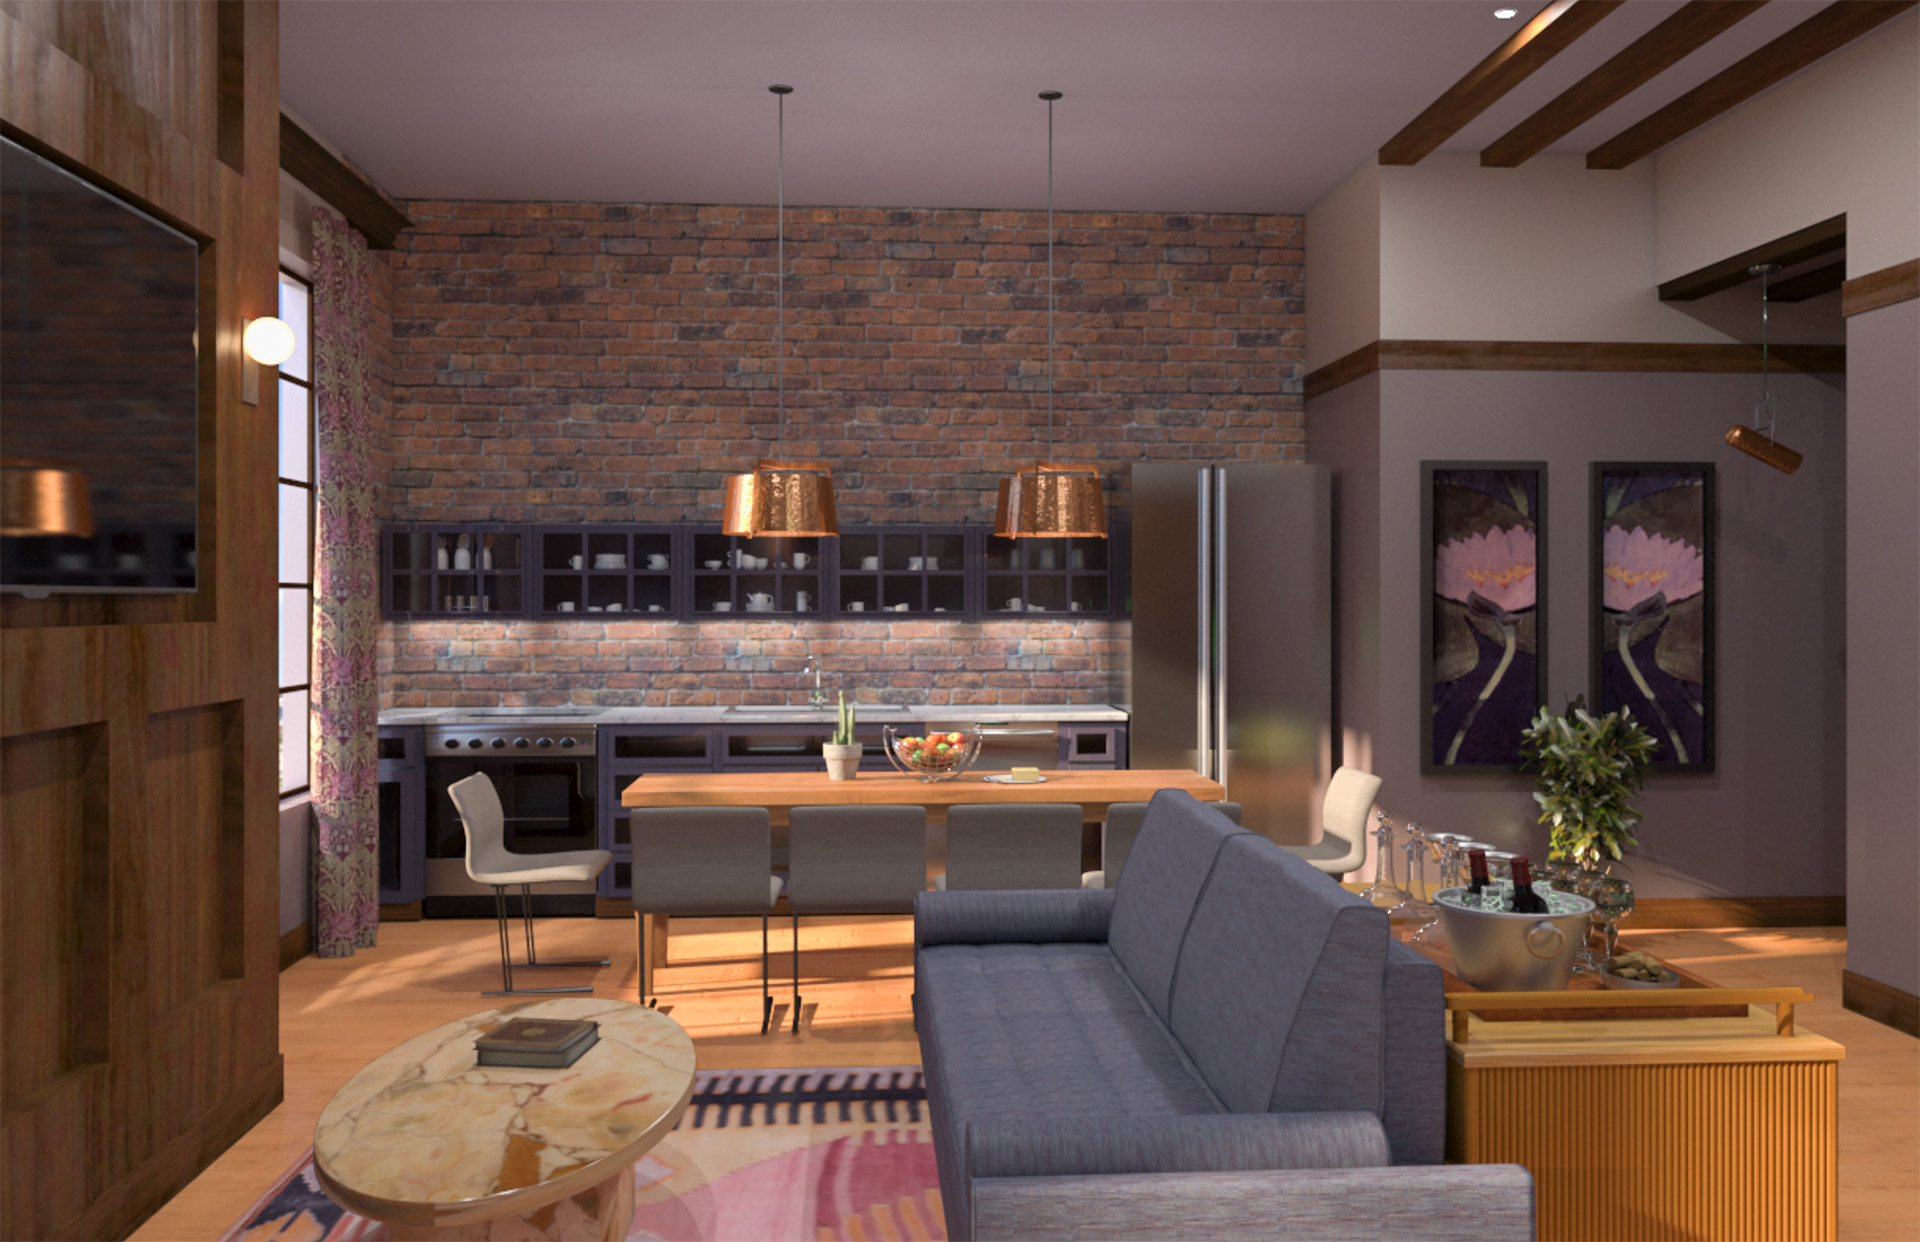 Rendering of the extended stay loft with a red brick tile accent wall, grey couch, kitchen table and flat screen tv. 